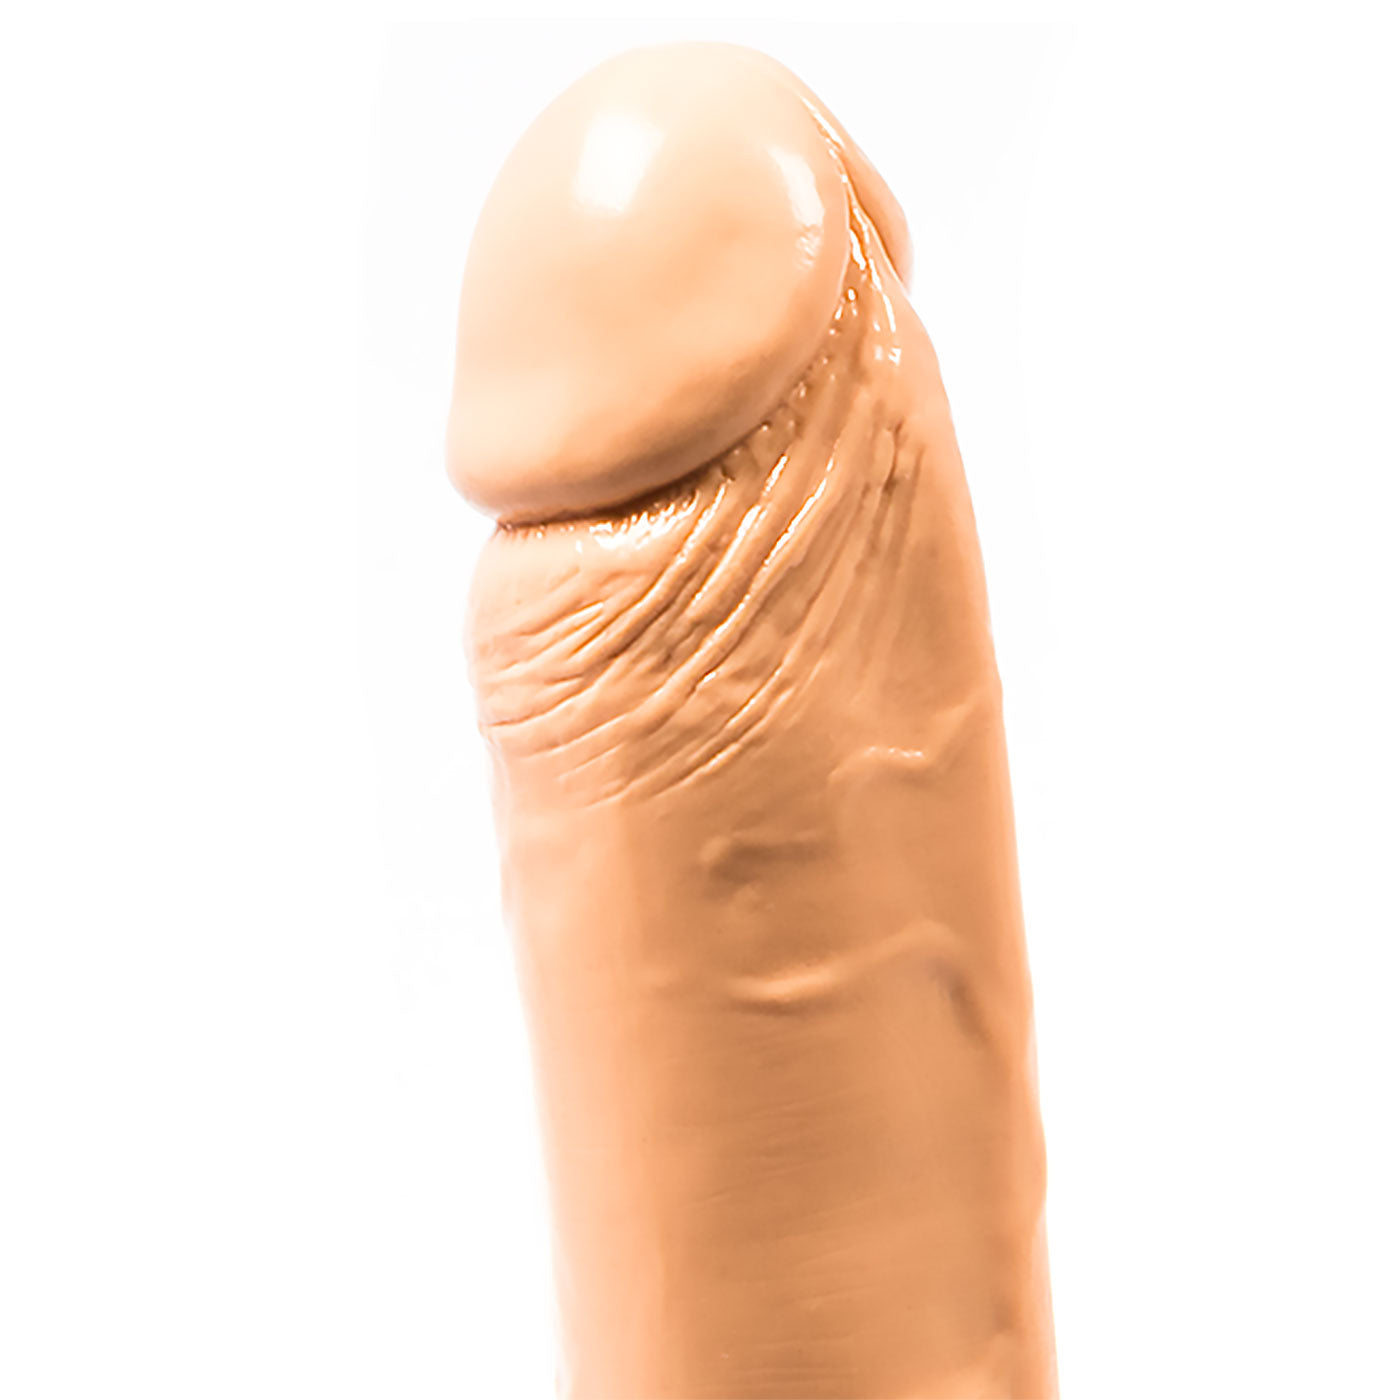 Dong W/Suction Cup Smooth 10 Inch Dildo